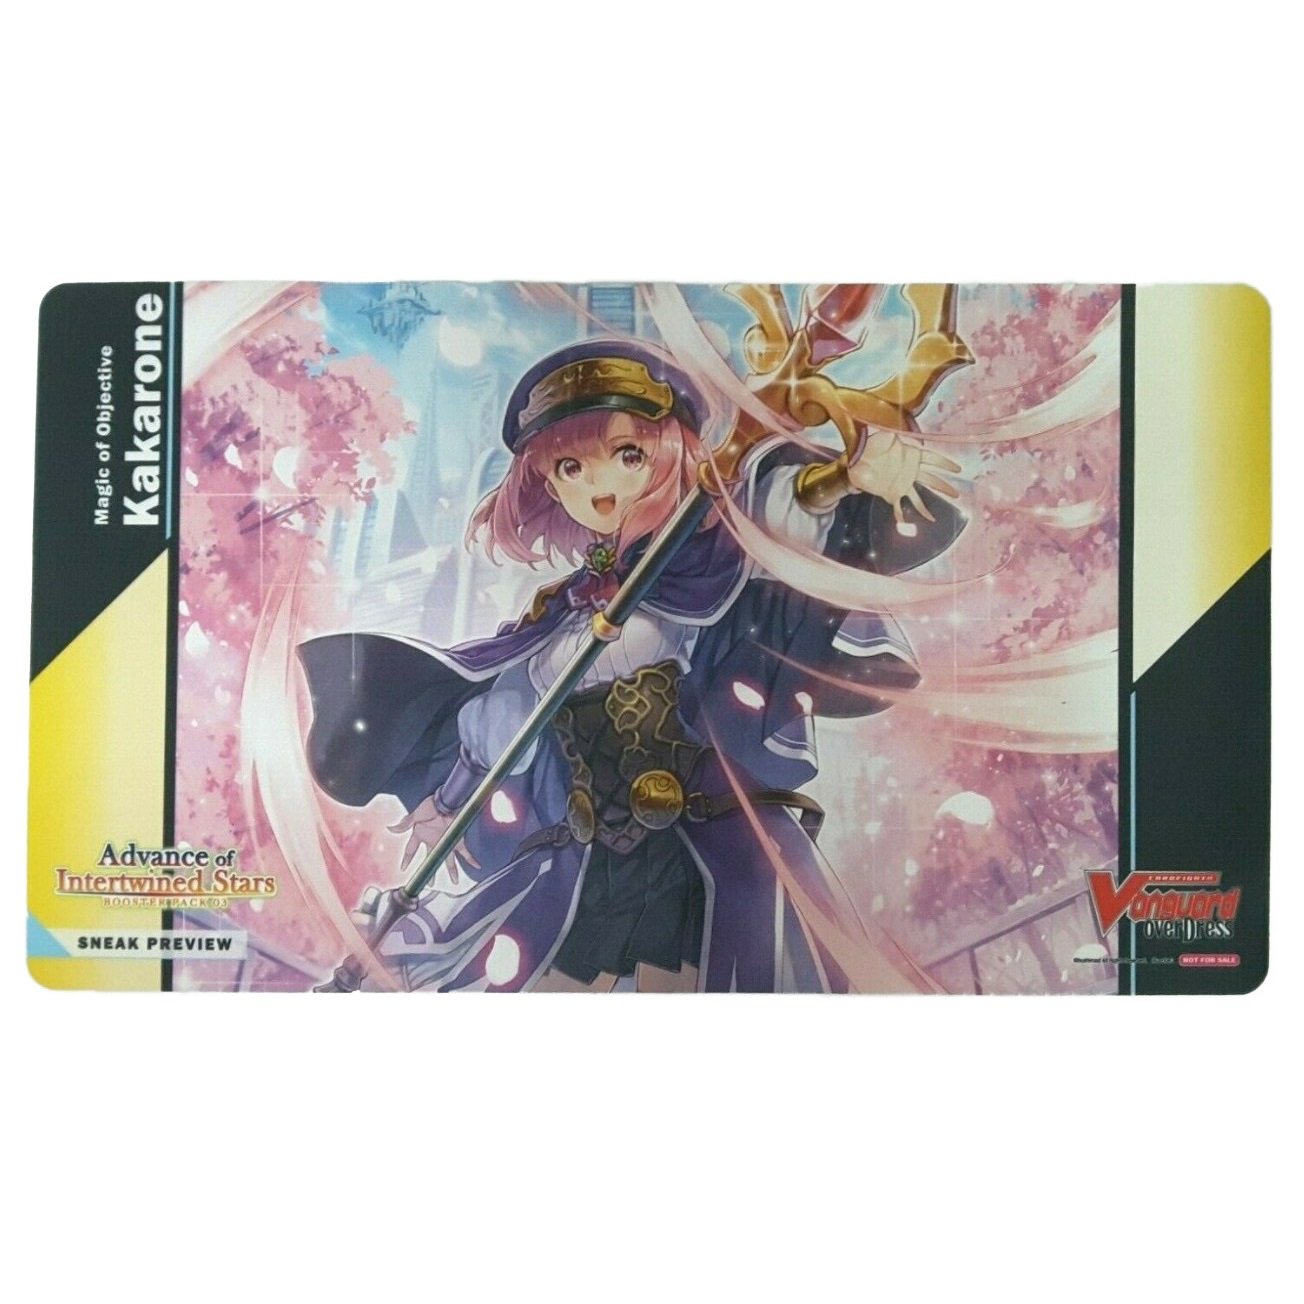 Cardfight!! Vanguard overDress Advance of Intertwined Stars (Sneak Preview Box Set) [VGE-D-BT03] (English)-Bushiroad-Ace Cards & Collectibles